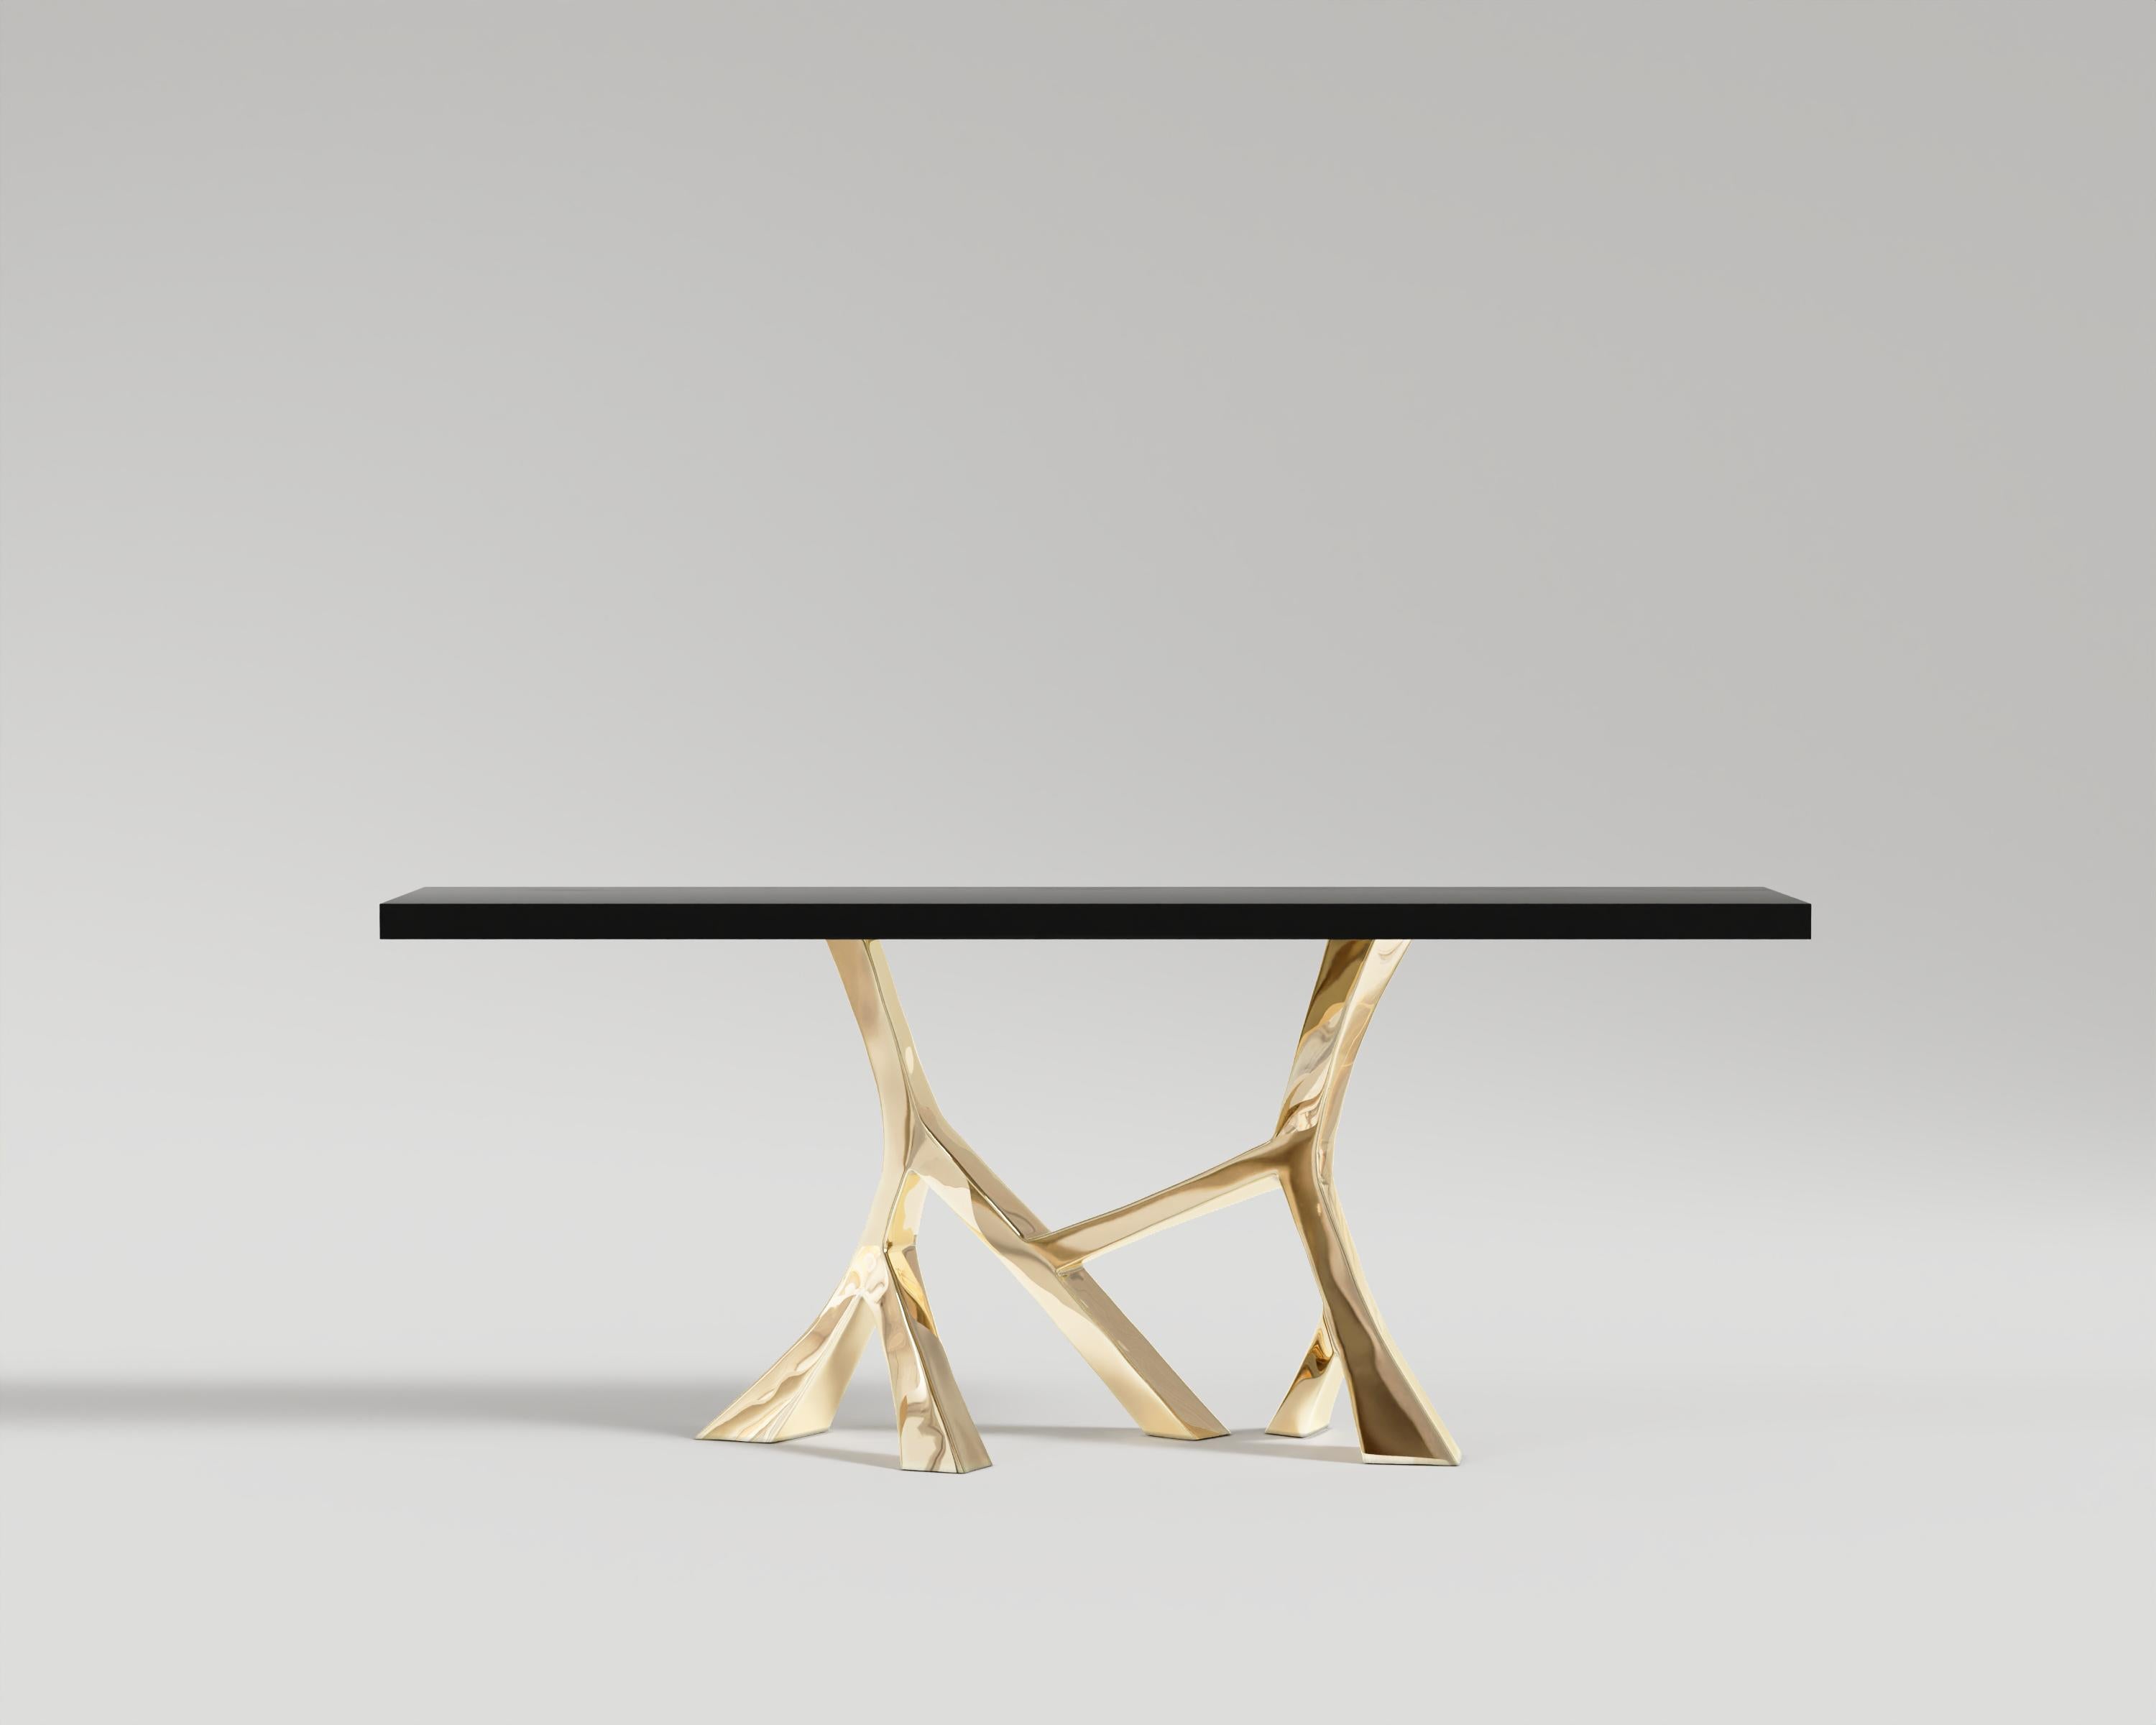 Vena Console Table 
Where craftsmanship and beauty become a couple and dance together. The natural lines of the human brain offer a starting point for organic design. The design is representative of unity and connection, just as the human brain